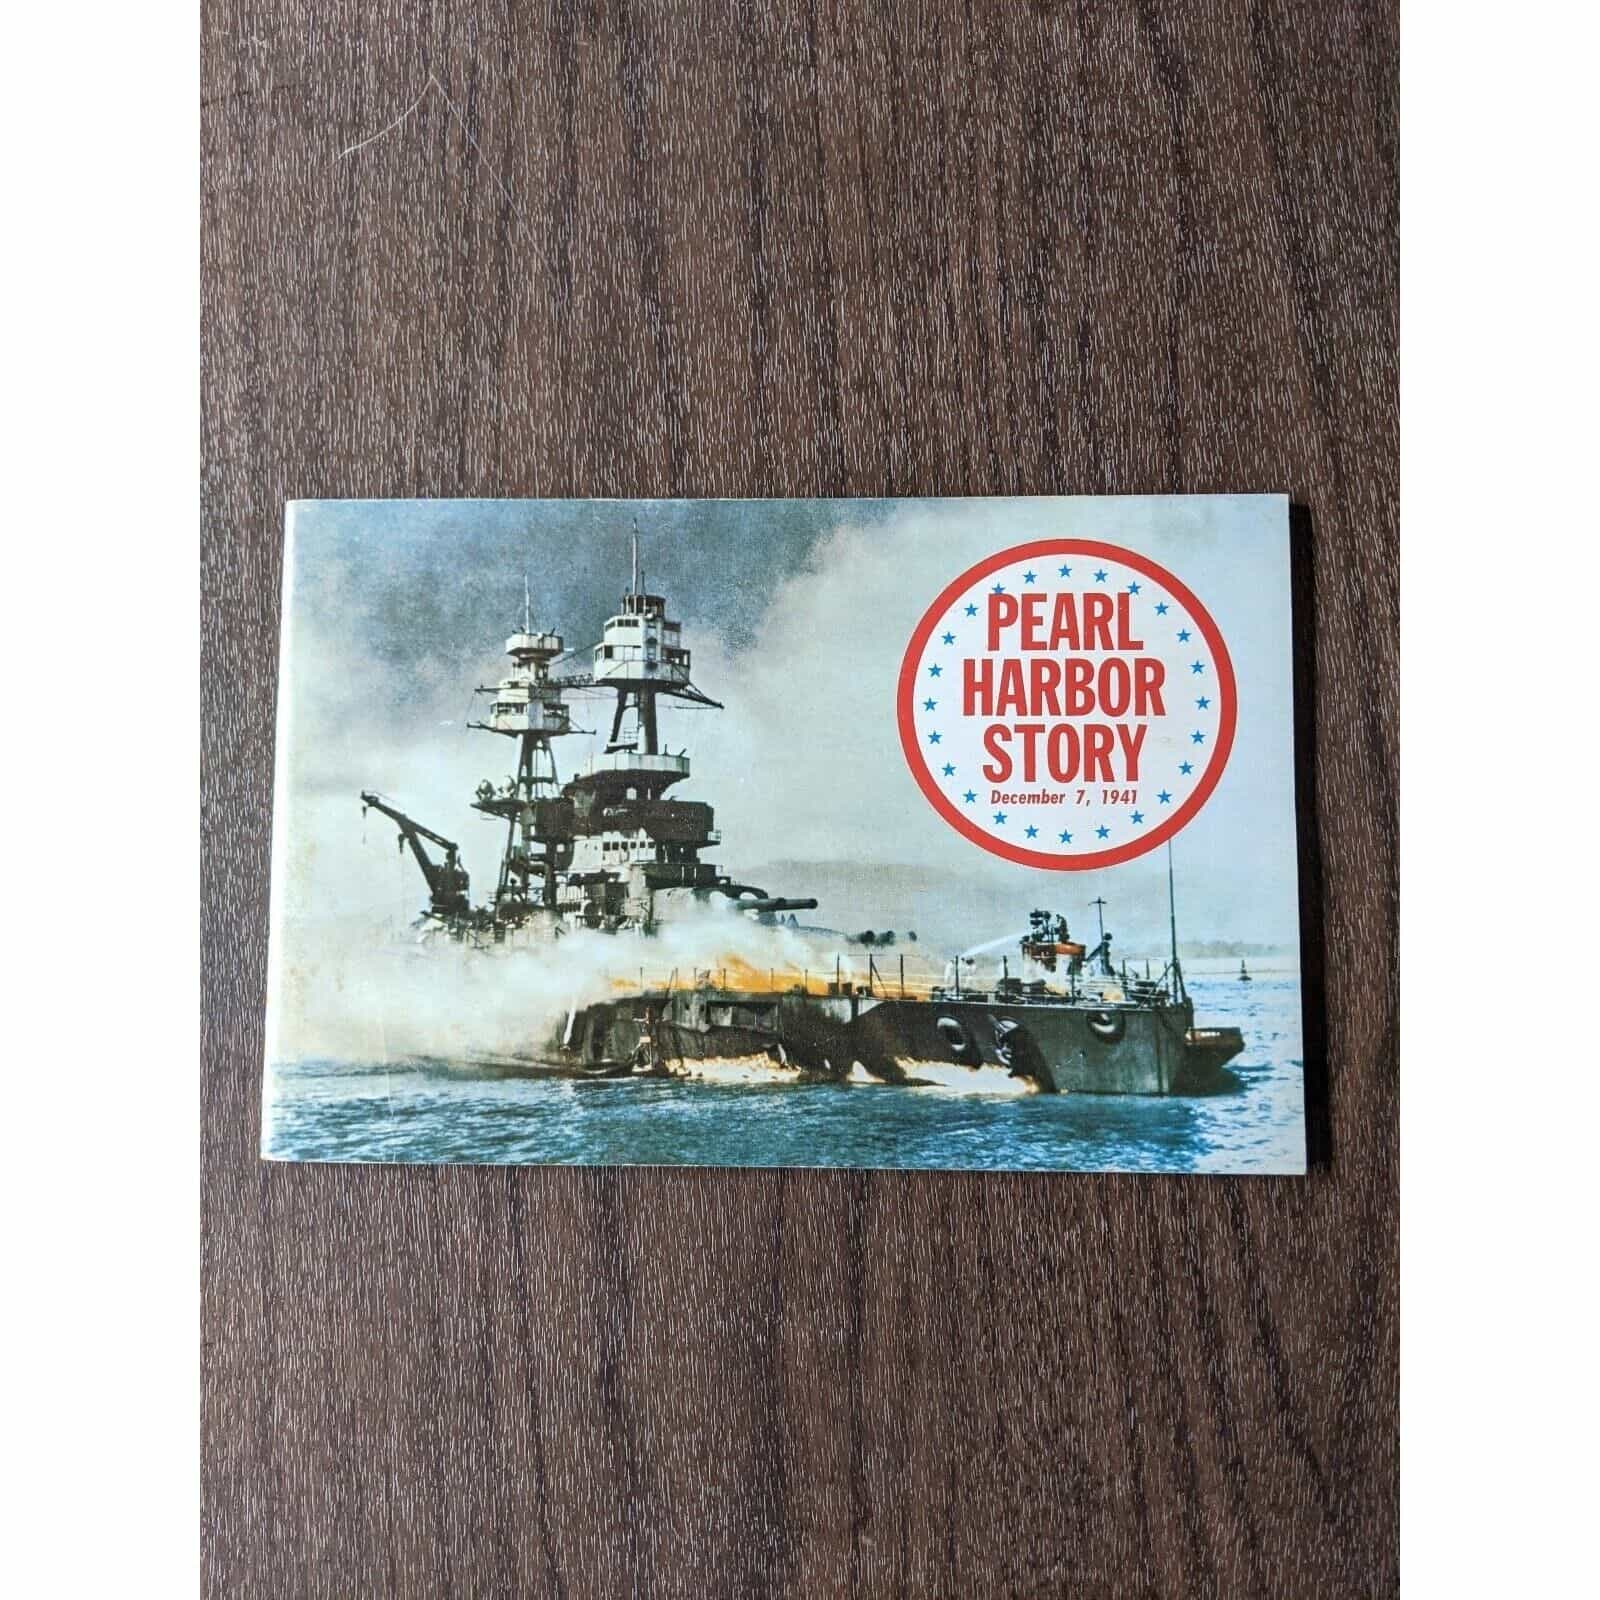 Pearl Harbor Story by Captain William T. Rice, USNR Book